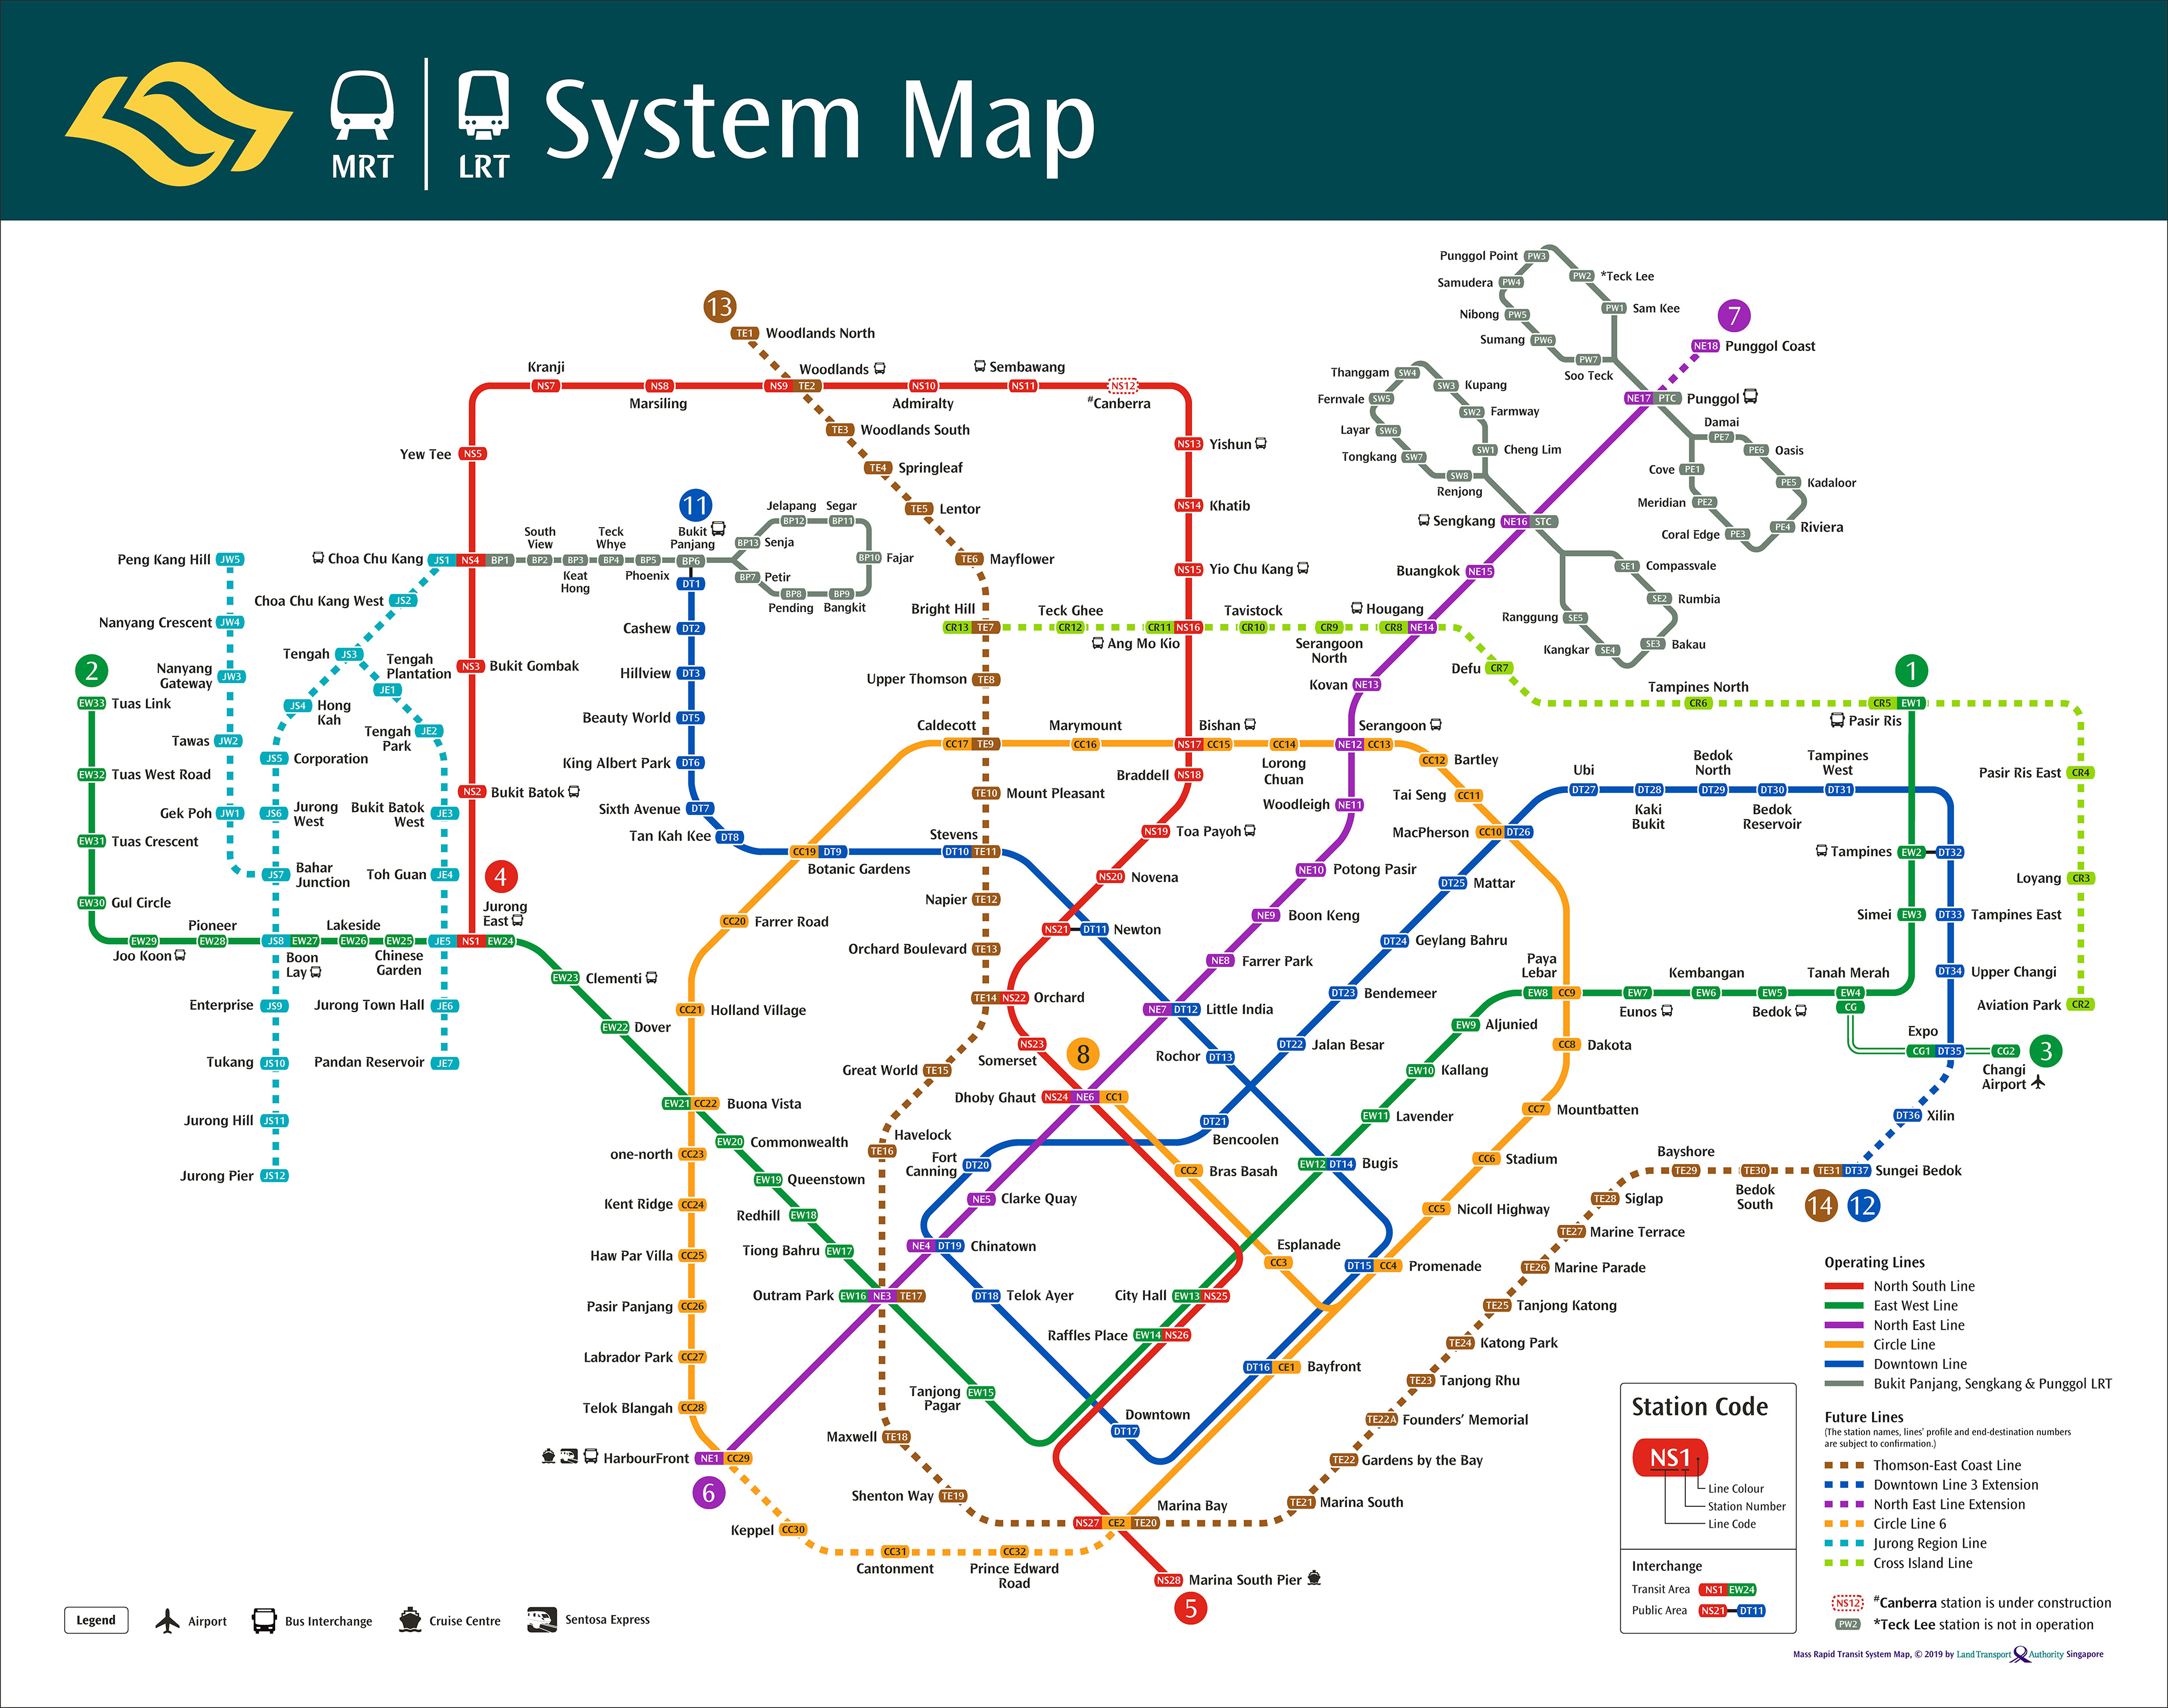 Latest LTA MRT system map shows SG getting ready for population boom by 2030